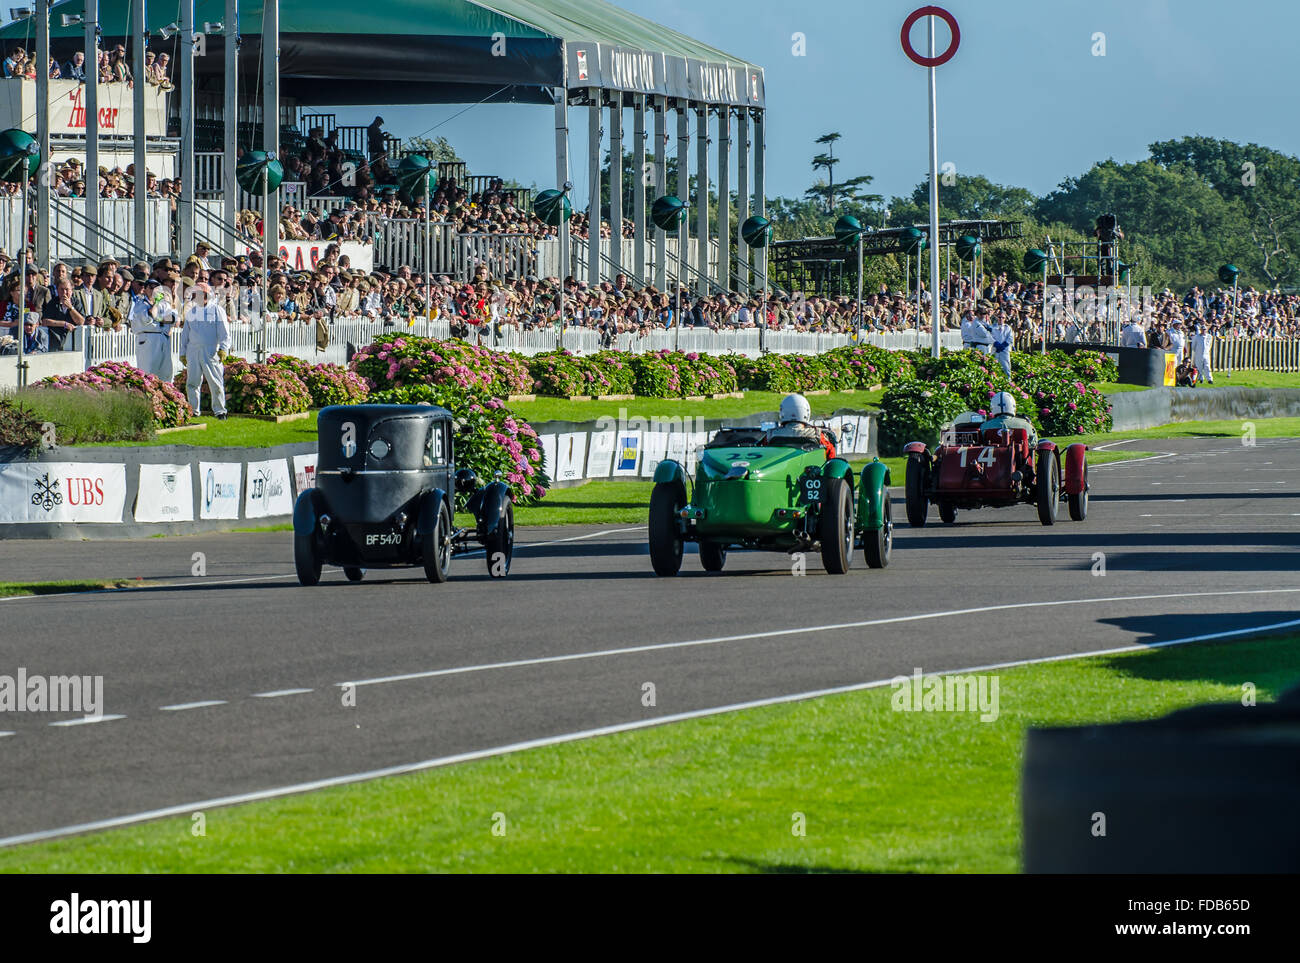 The Goodwood Revival is a festival held at Goodwood Circuit for the types of road race cars from its 40s-60s heydays. Vintage cars racing past stand Stock Photo